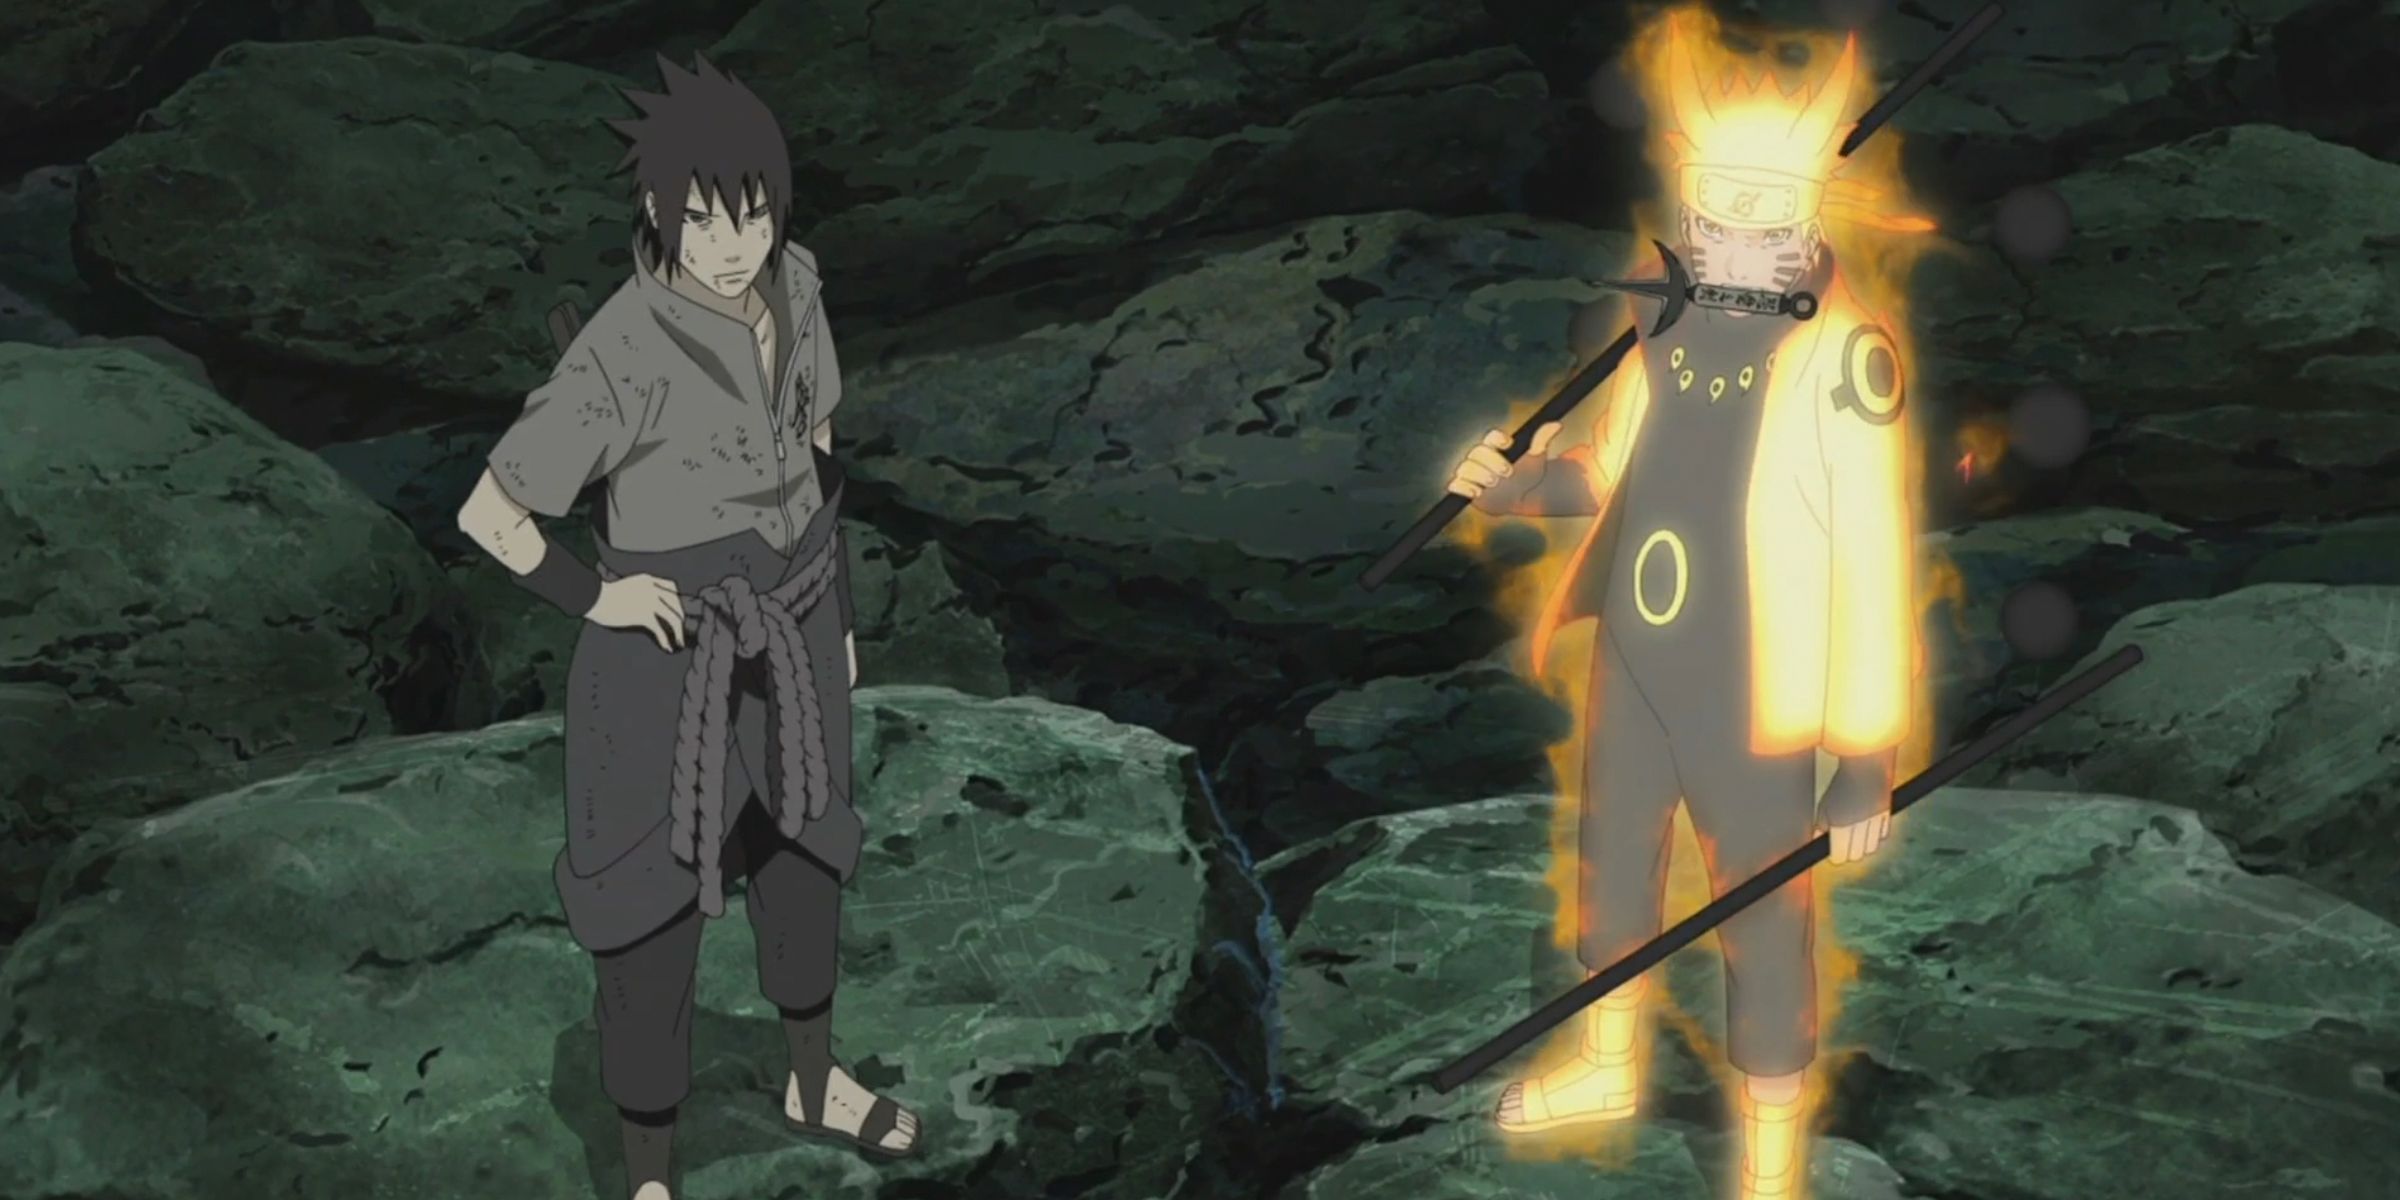 Sasuke and Naruto standing on the rocks in Naruto Shippuden episode To Rise Up